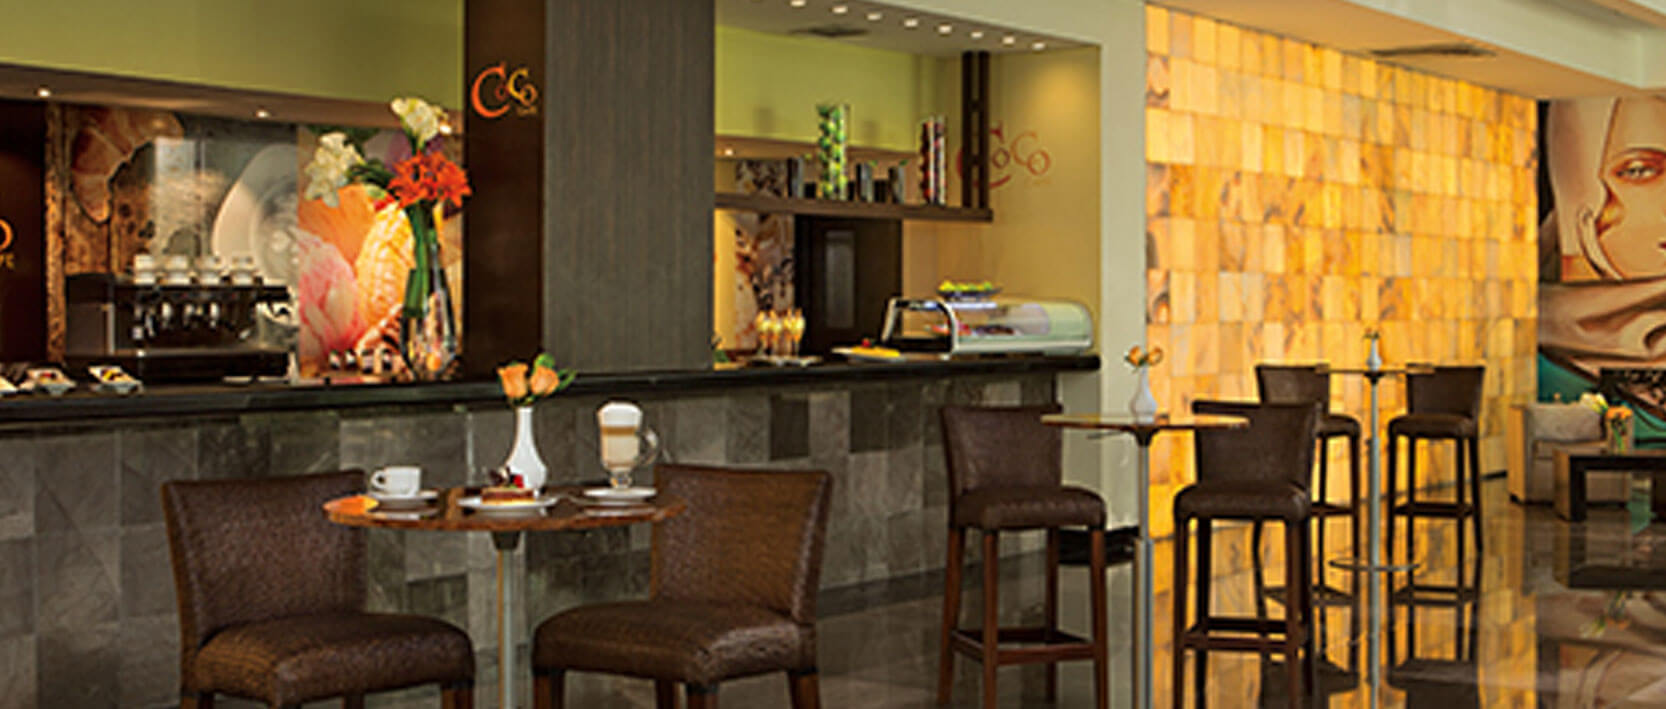 Dreams Sands Cancun Restaurants and Bars - Coco Cafe